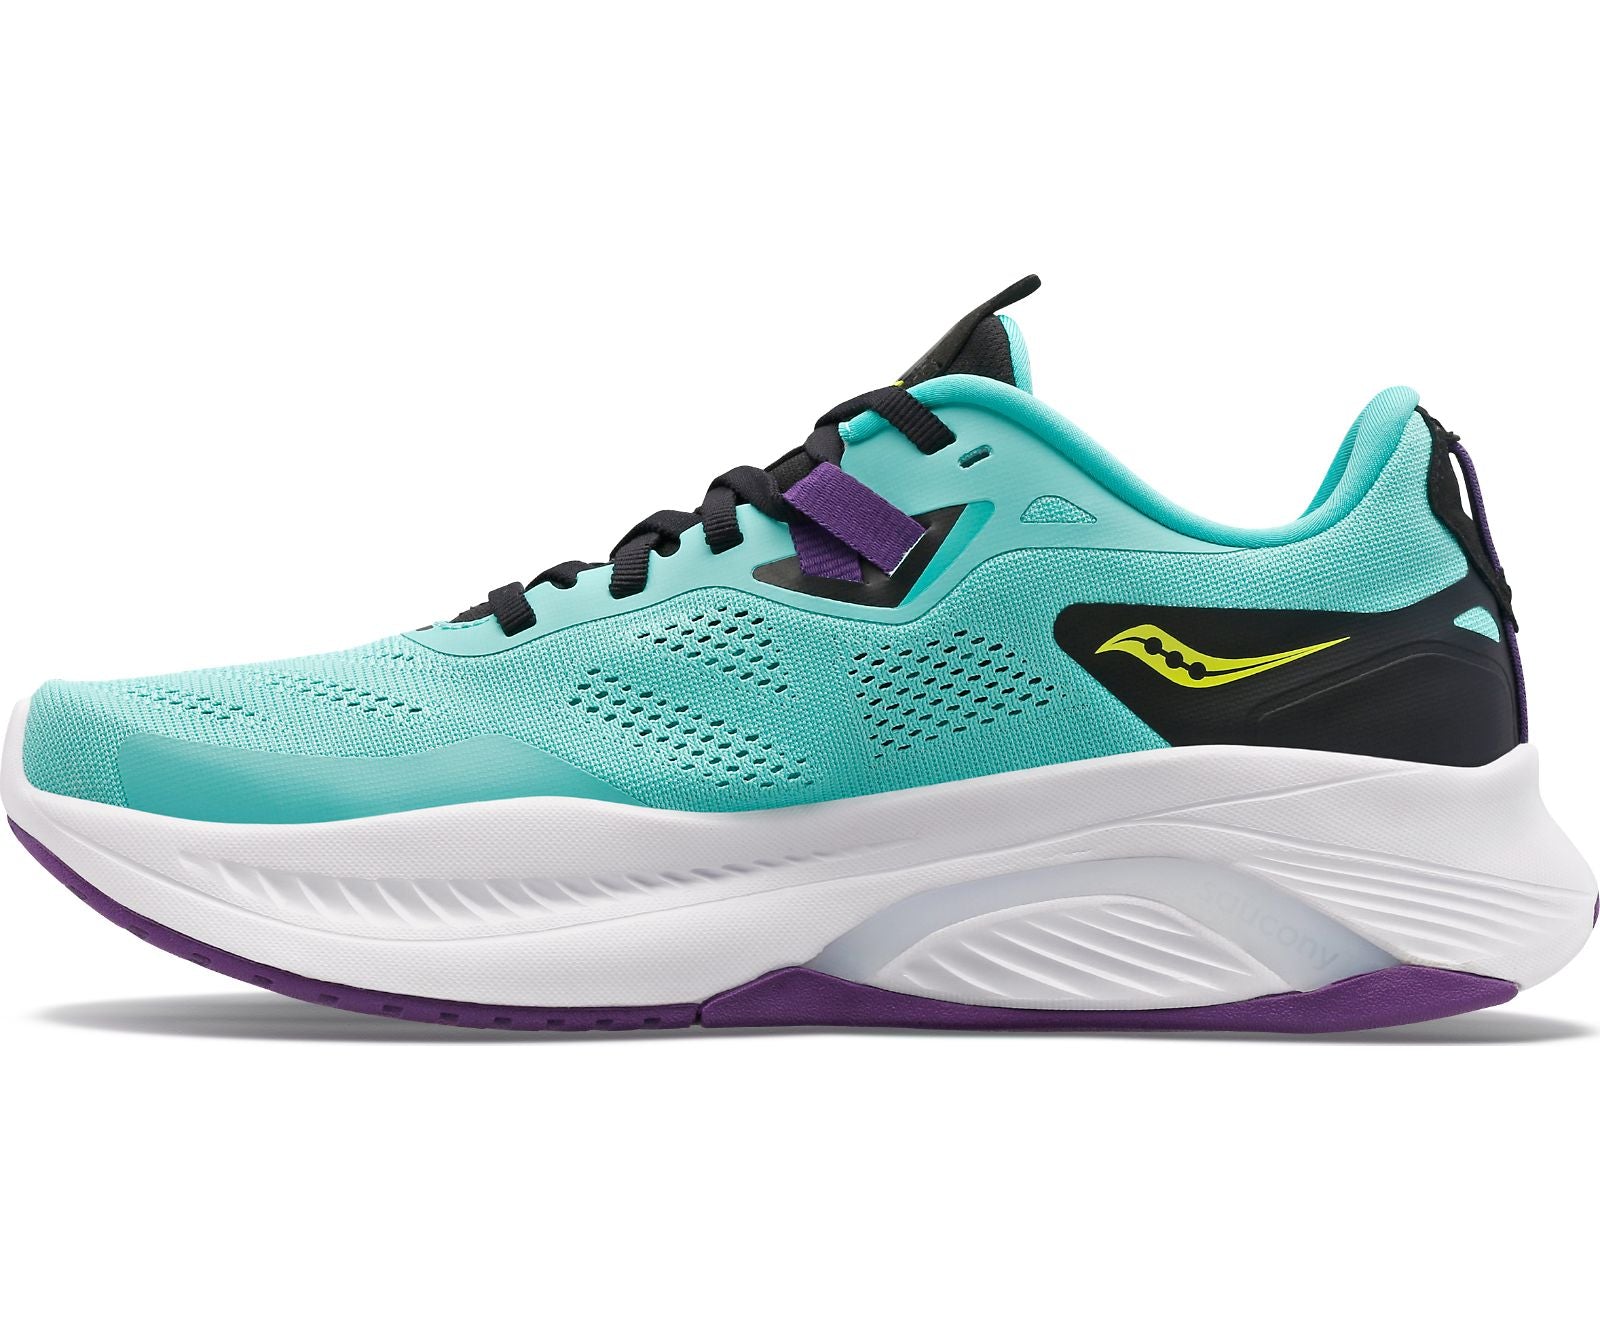 Medial view of the Women's Saucony Guide 15 in the color Cool Mint/Acid